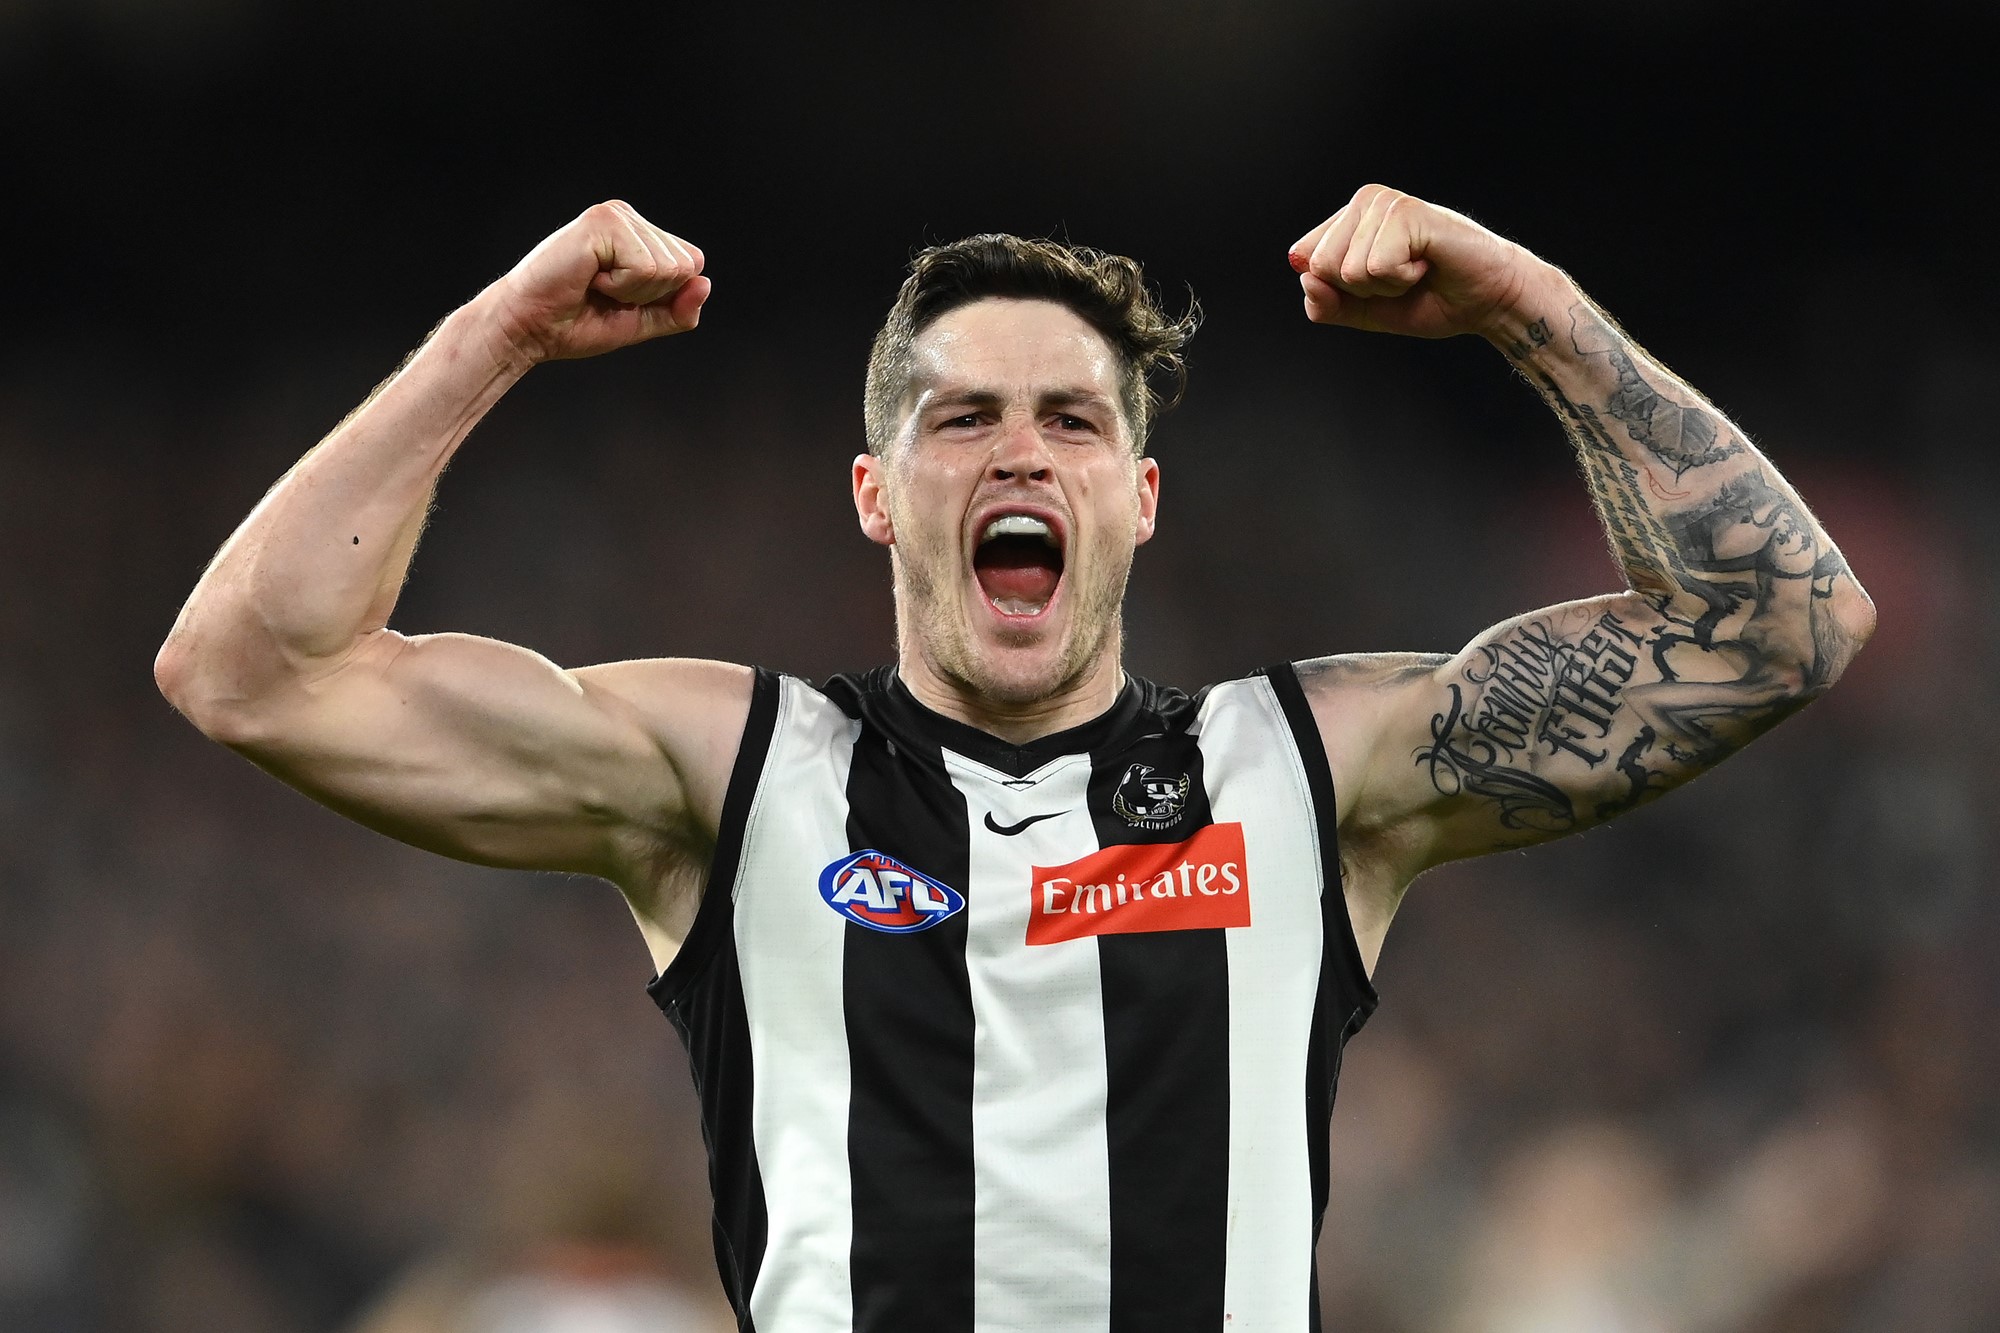 Collingwood beat Fremantle by 20 points to book AFL preliminary final